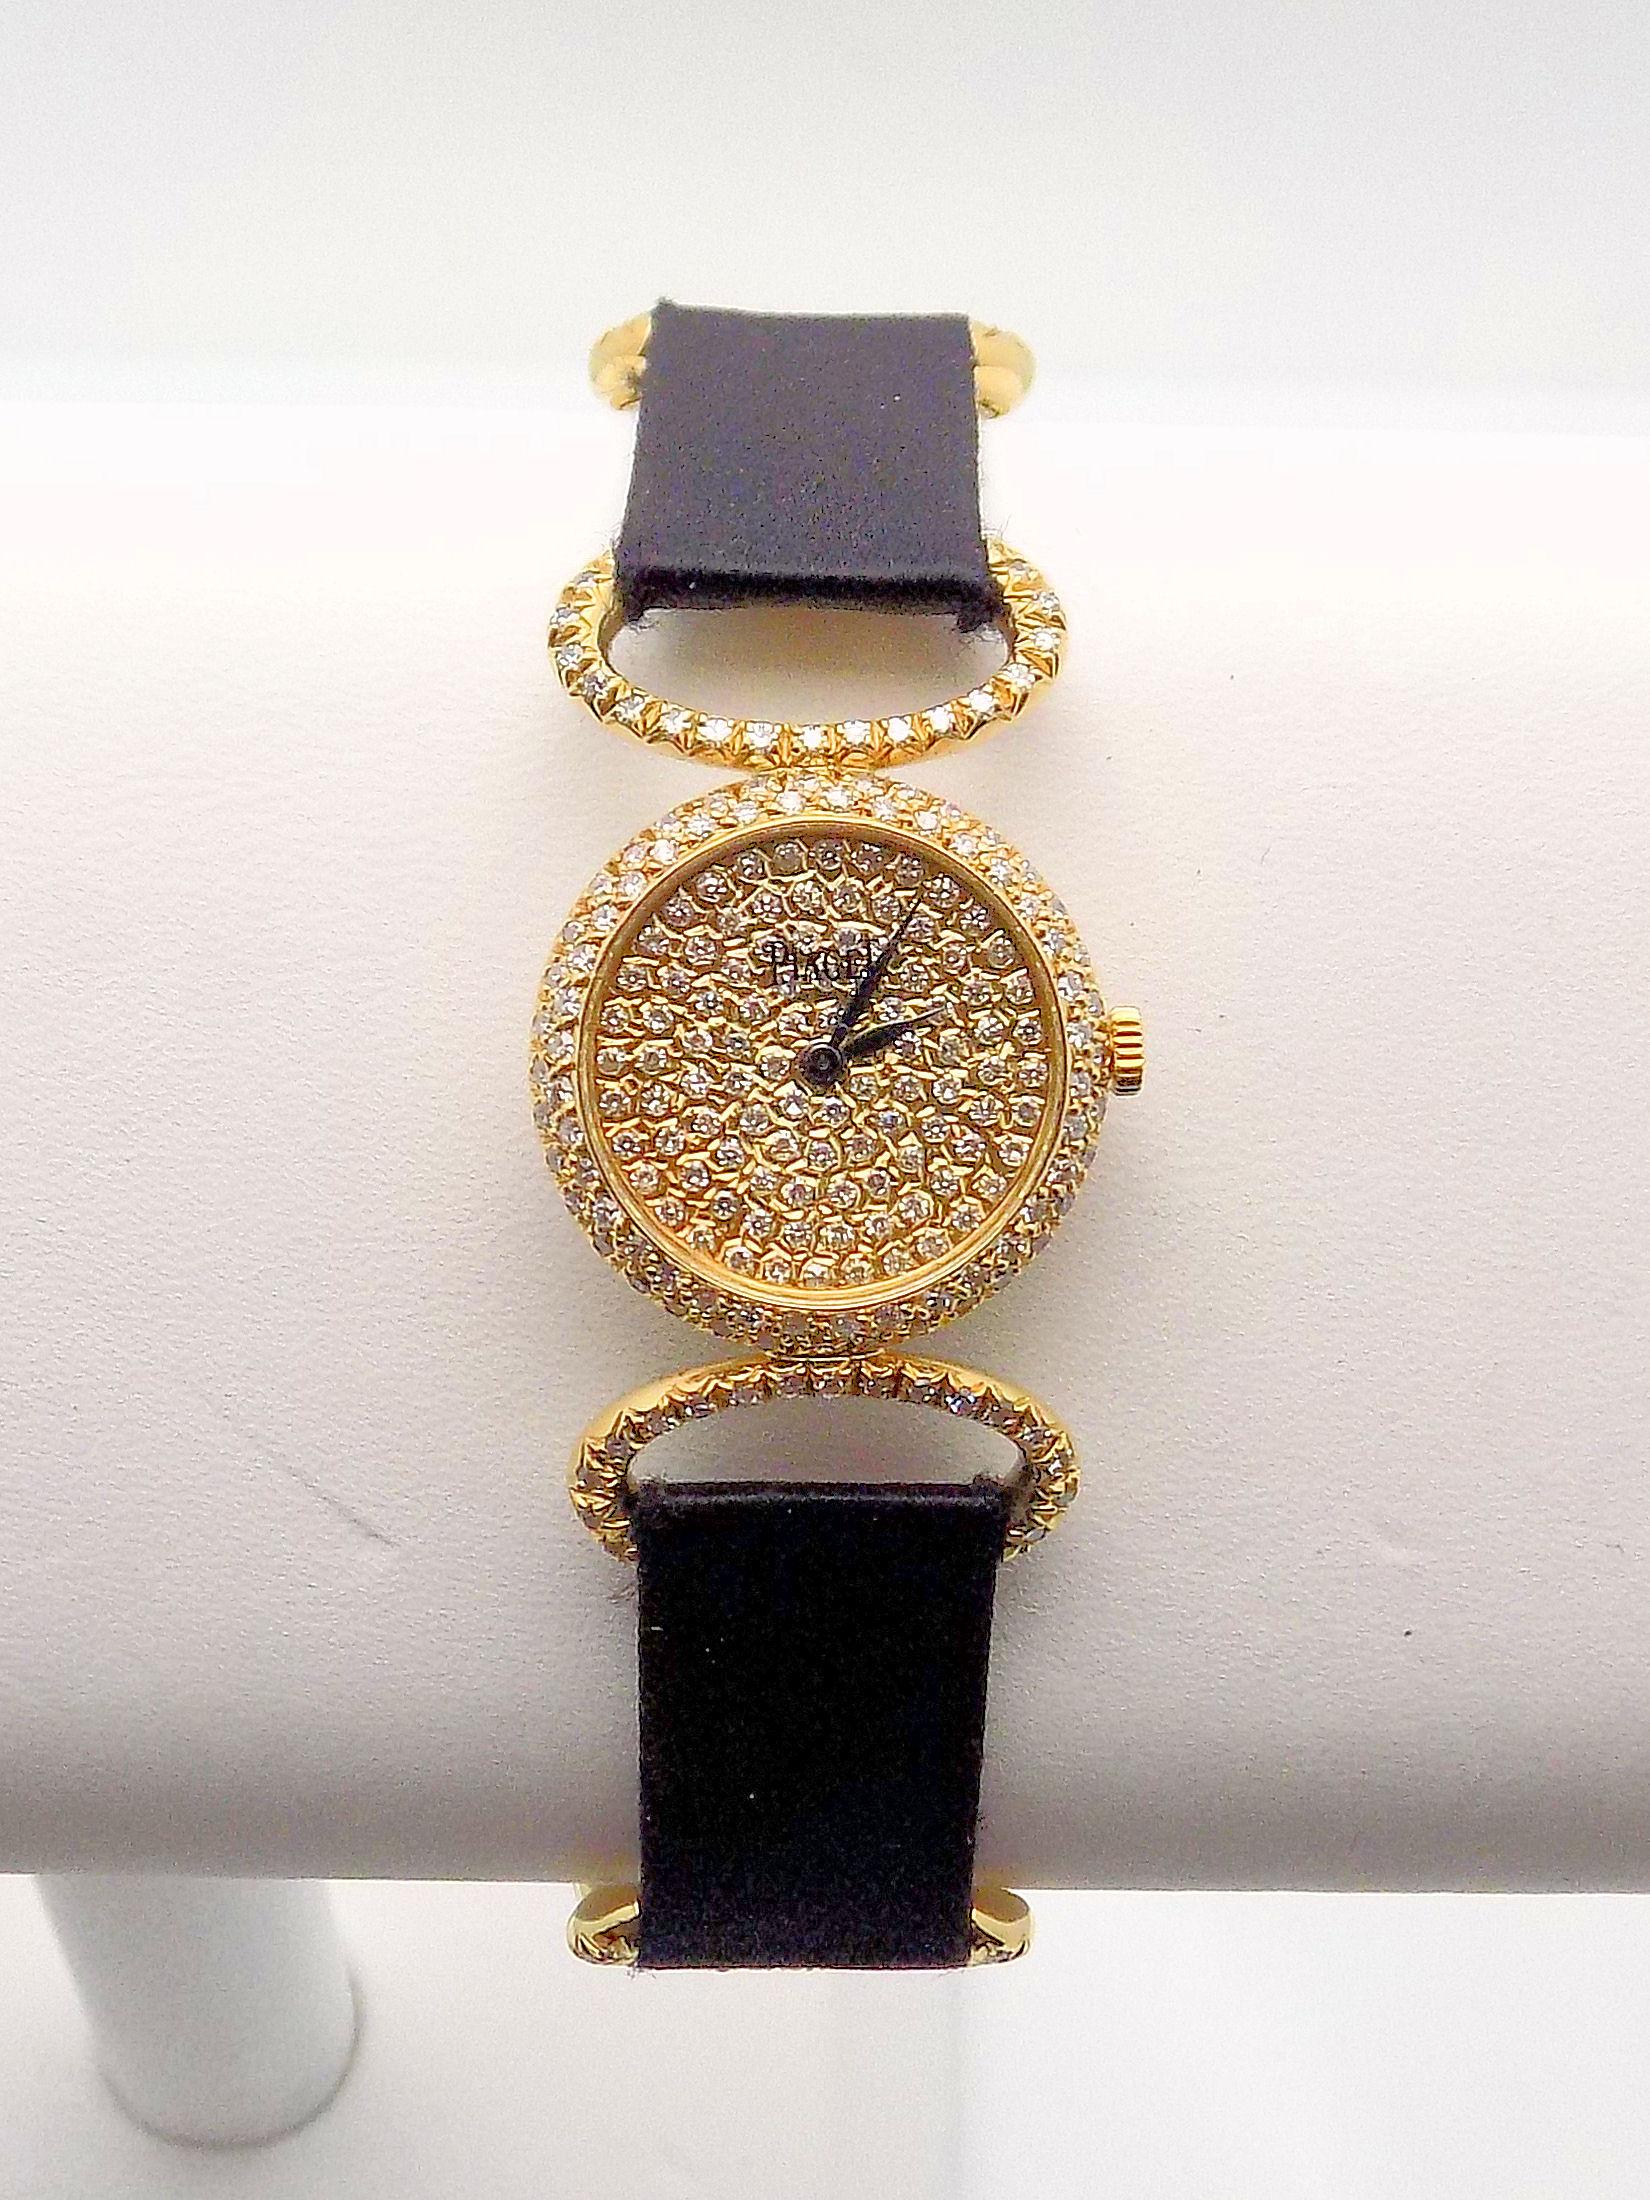 Stunning 18 Karat Yellow Gold Wristwatch by Piaget featuring a Diamond and Satin Strap; Style Number 4125 DB. 284 Round Diamonds Approximately 2.00 Carat Total Weight, VVS-2, F-G.  Factory Service/Restoration By Piaget, Switzerland, 12-2018.  Serial